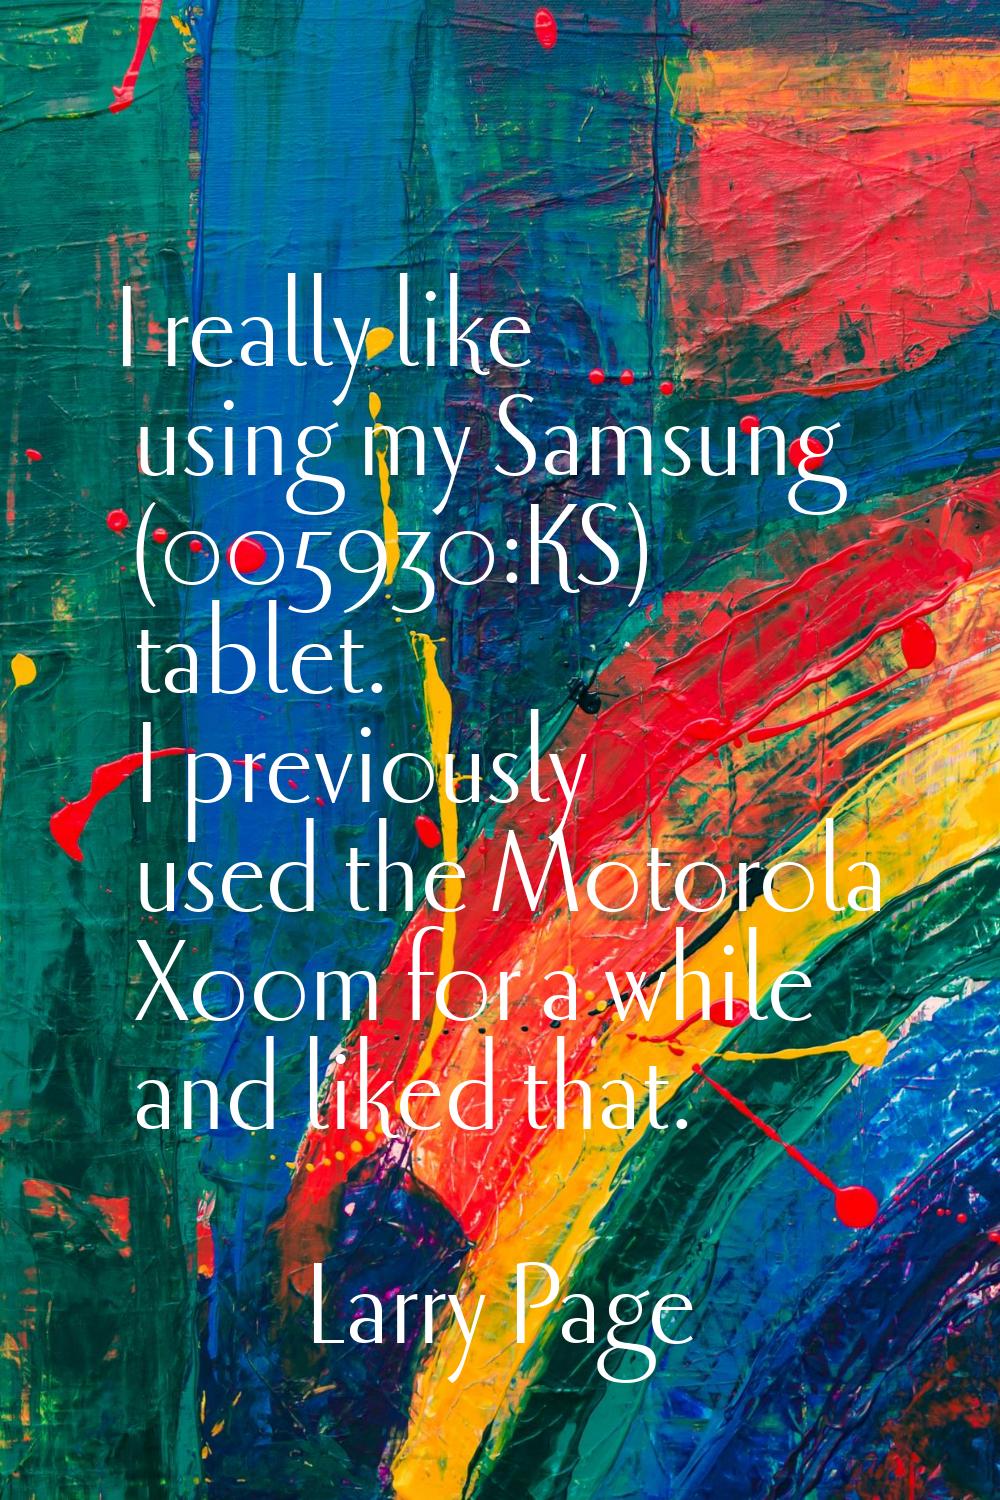 I really like using my Samsung (005930:KS) tablet. I previously used the Motorola Xoom for a while 